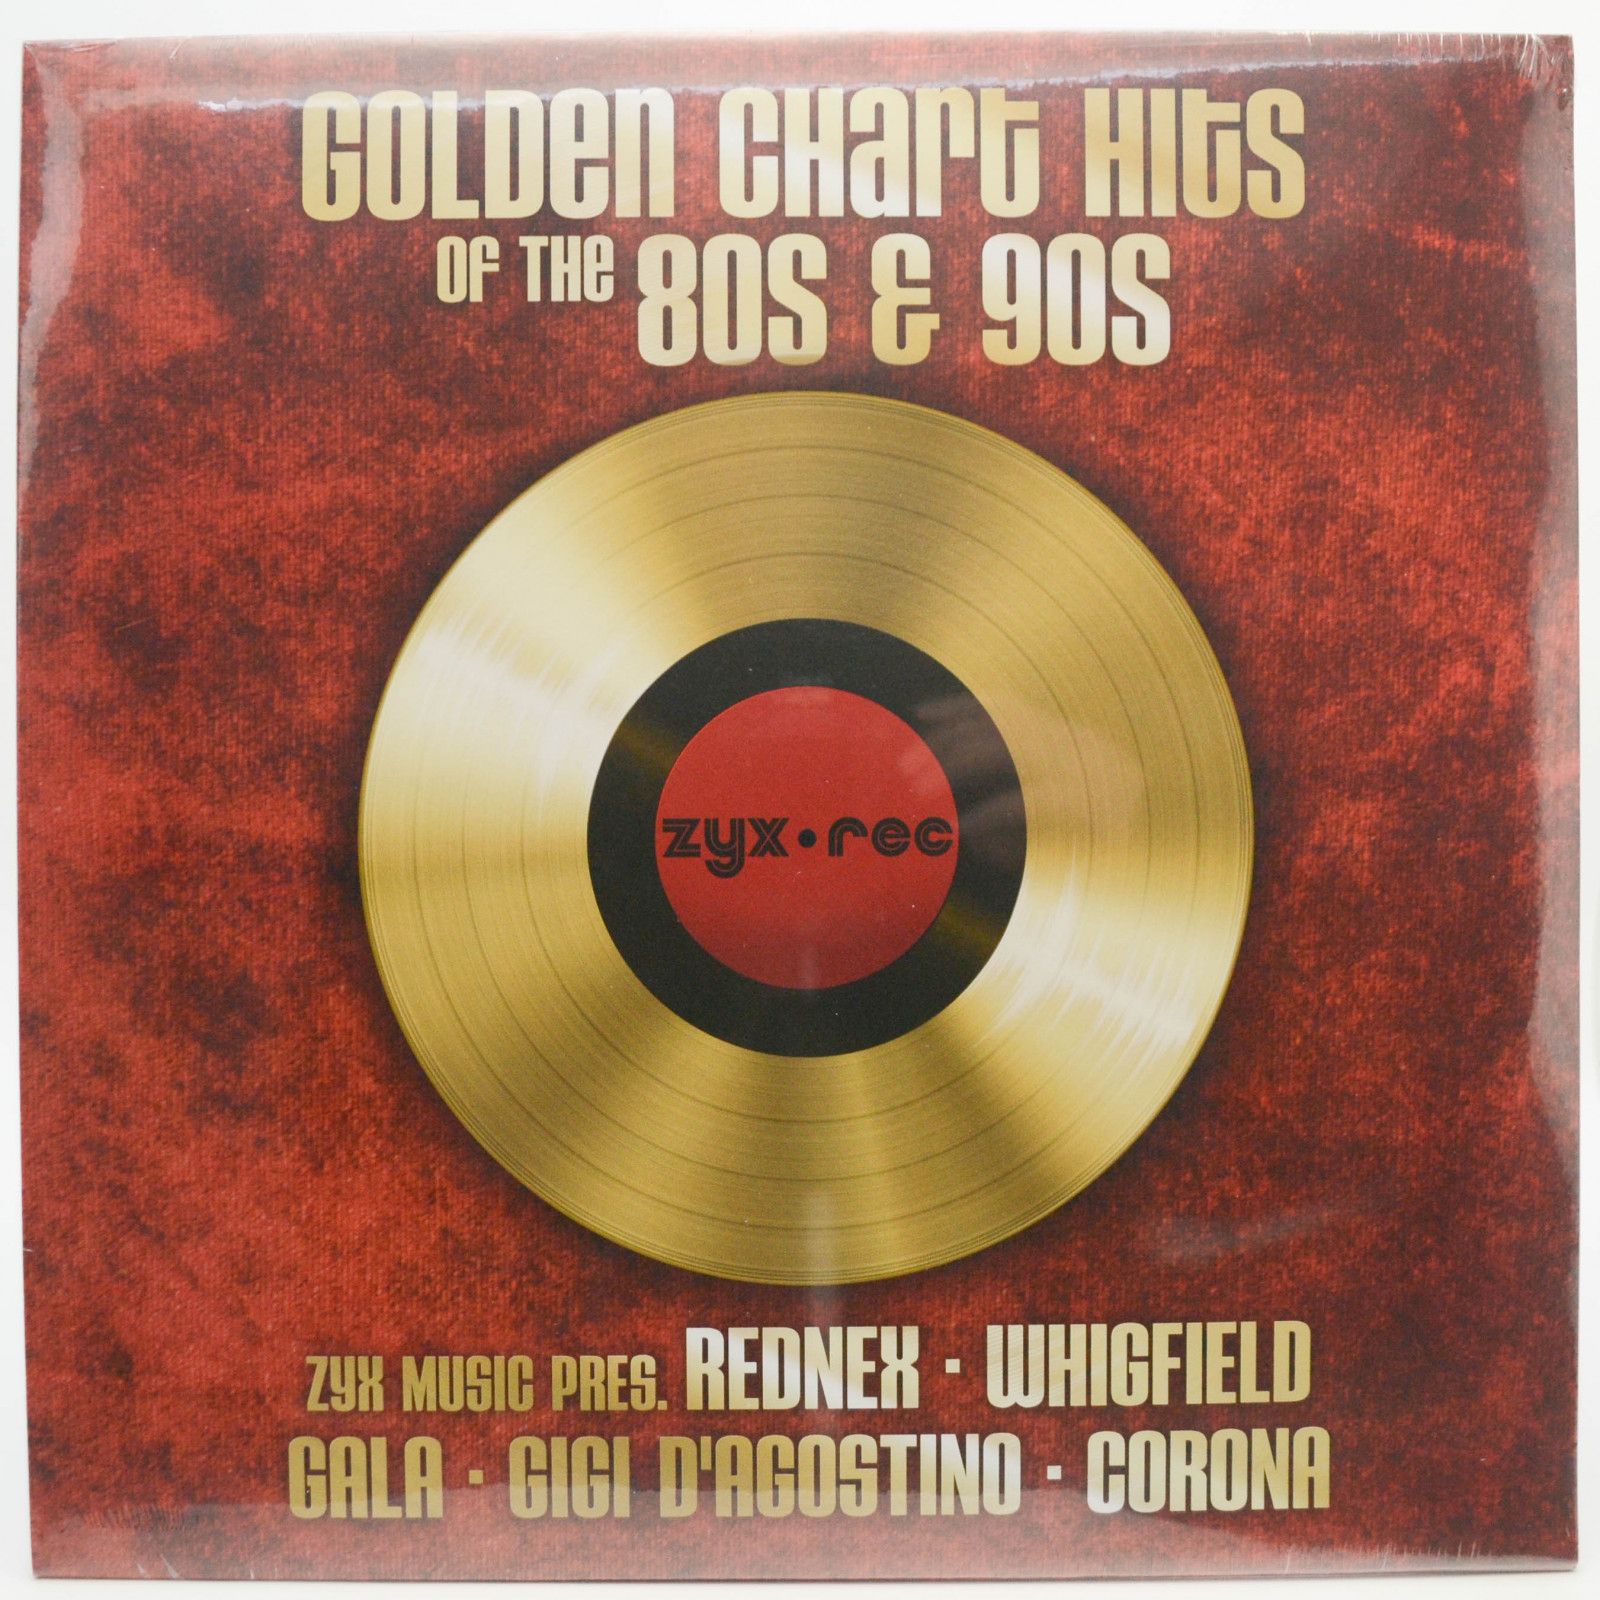 Various — Golden Chart Hits Of The 80s & 90s, 2019